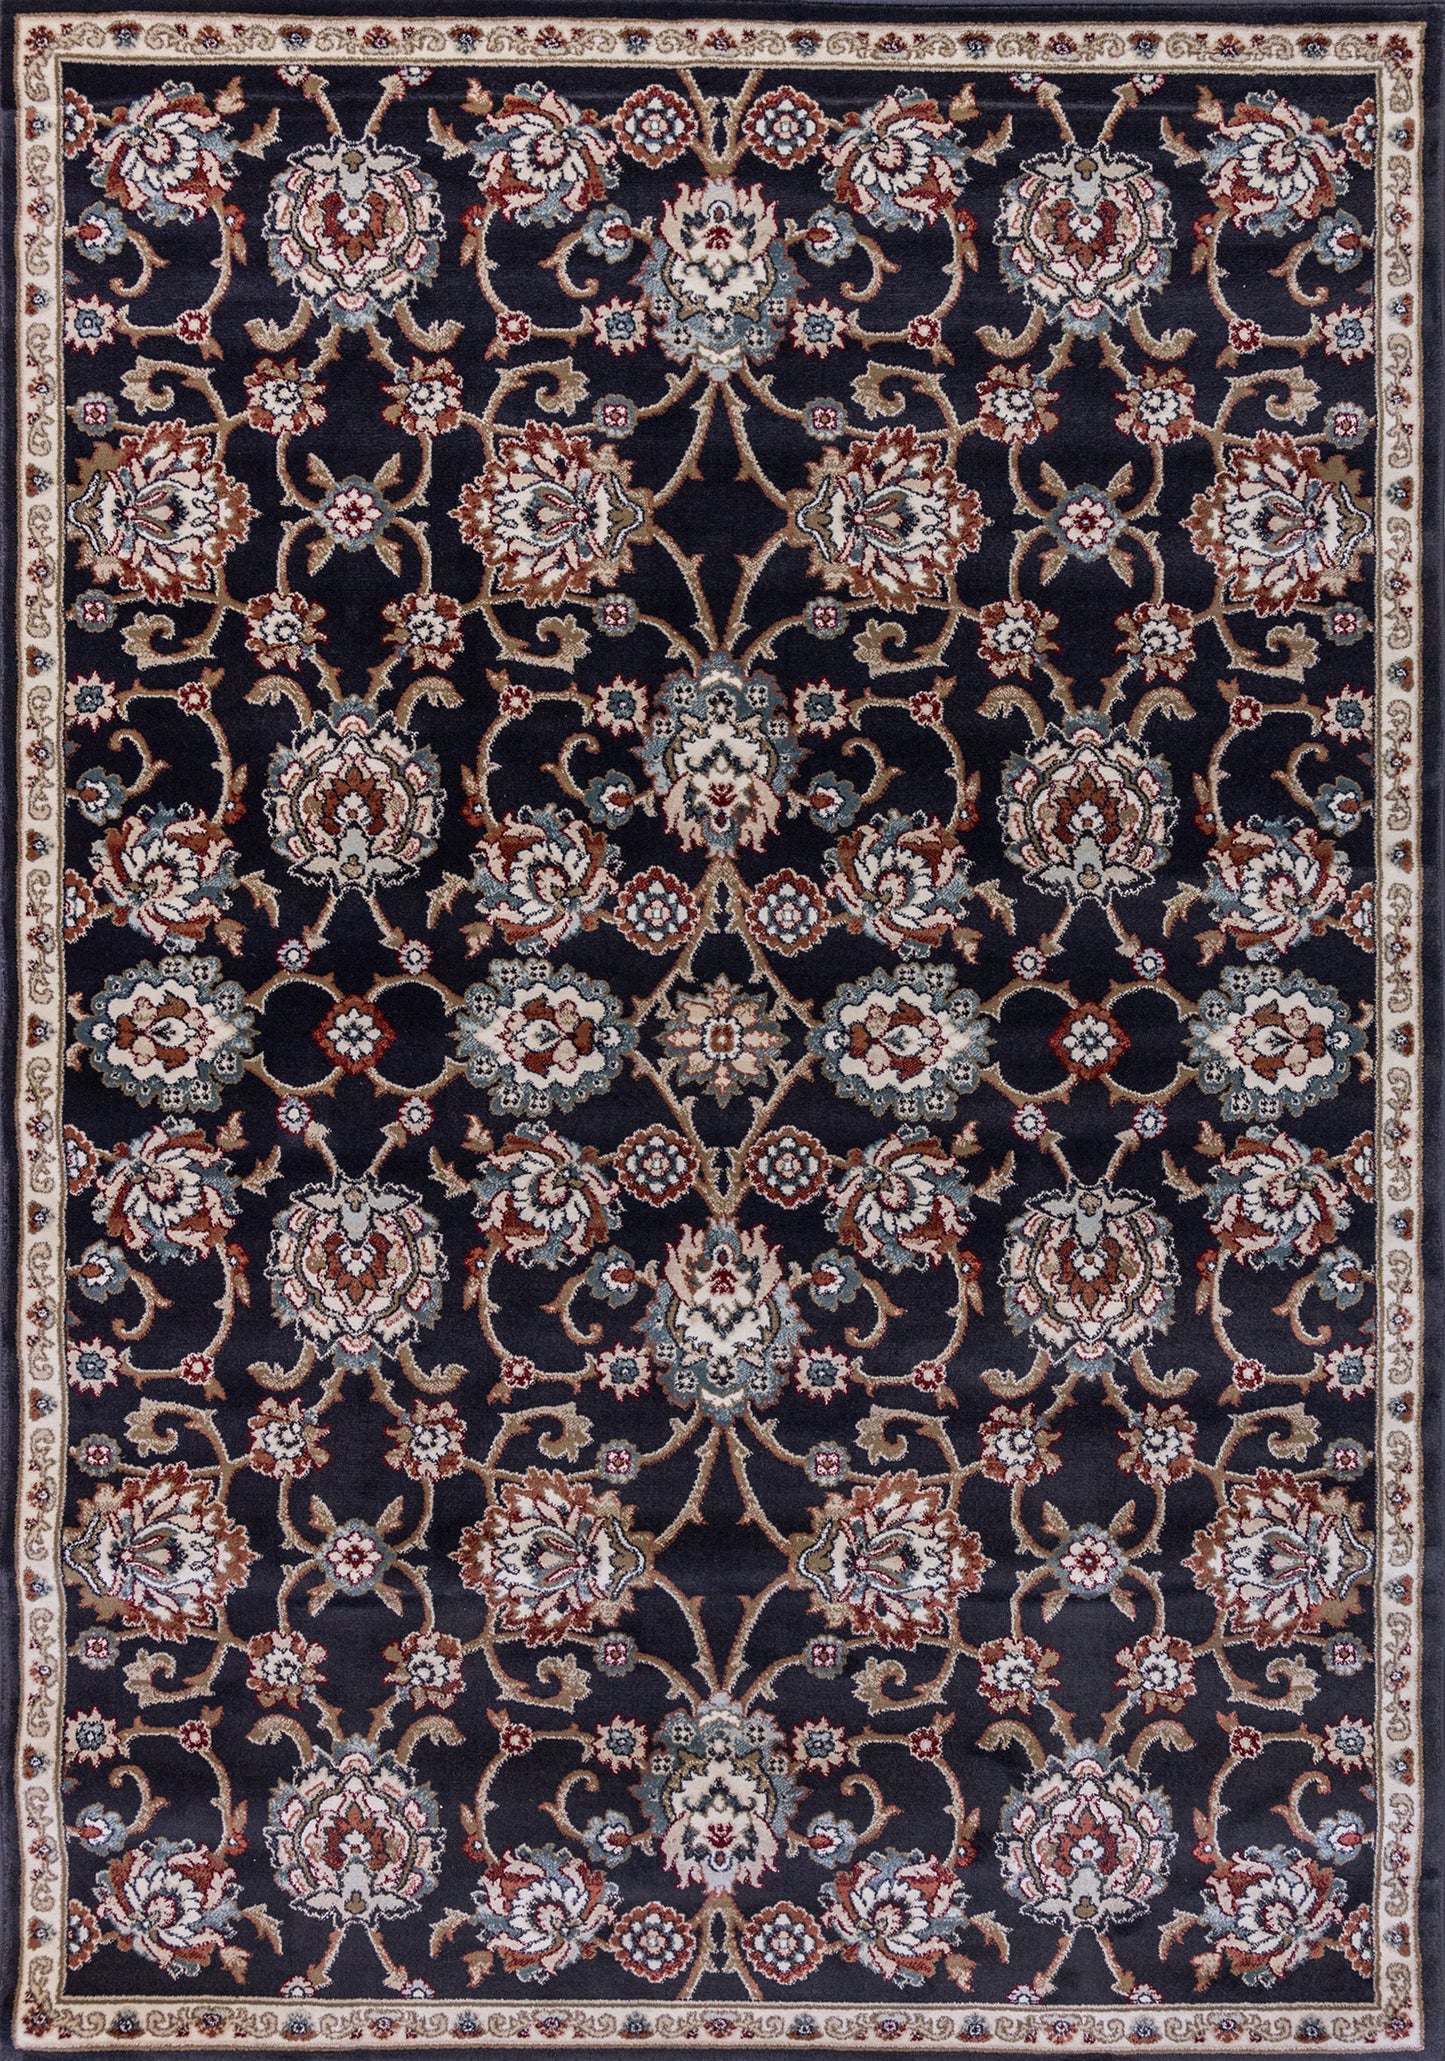 Melody 985020-558 Anthracite Area Rug